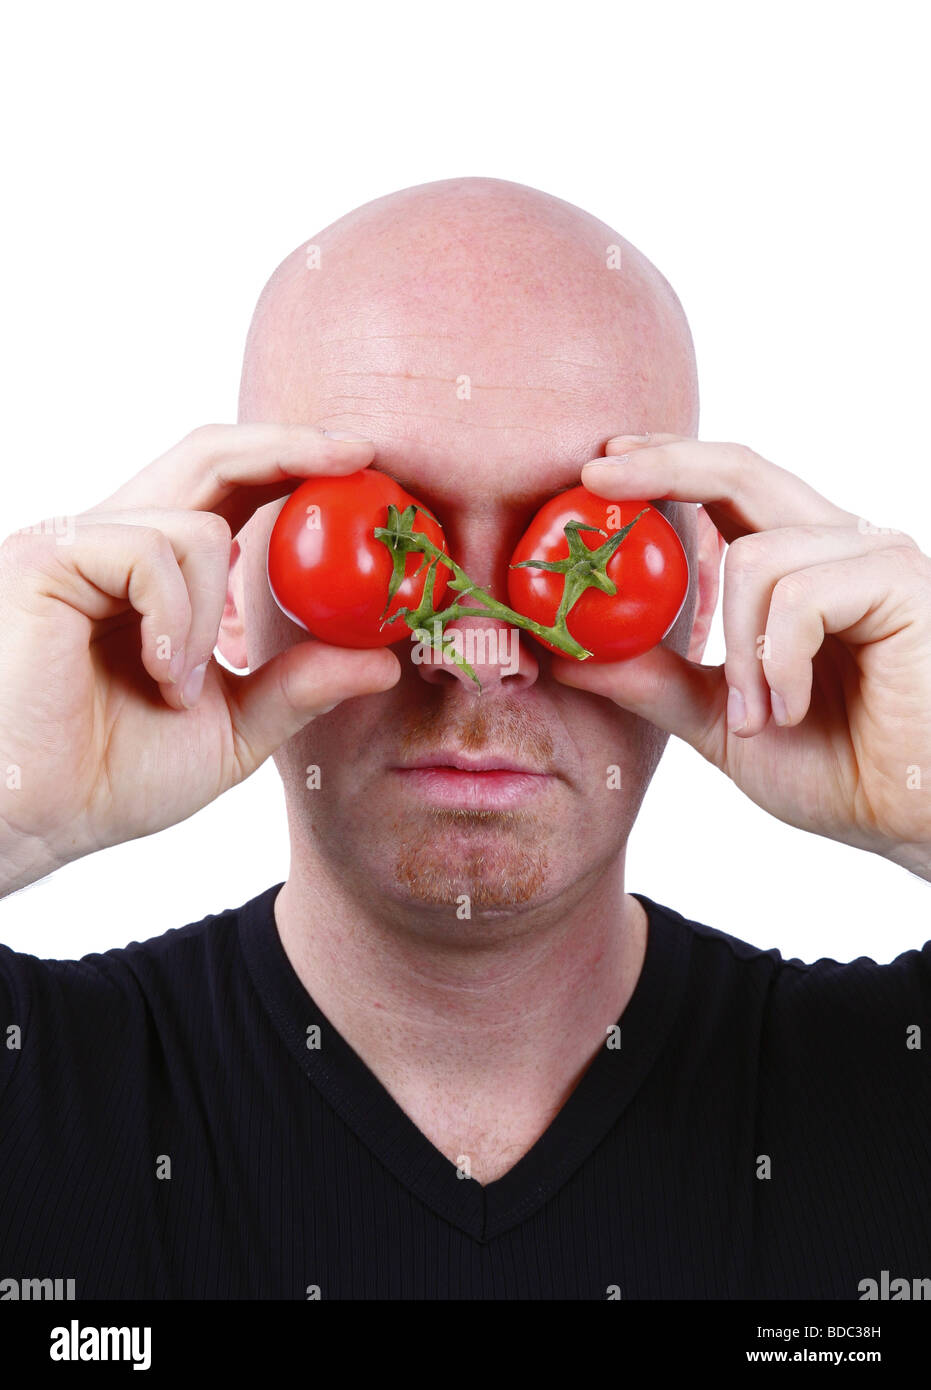 bald headed man has tomatoes in front of his eyes Stock Photo